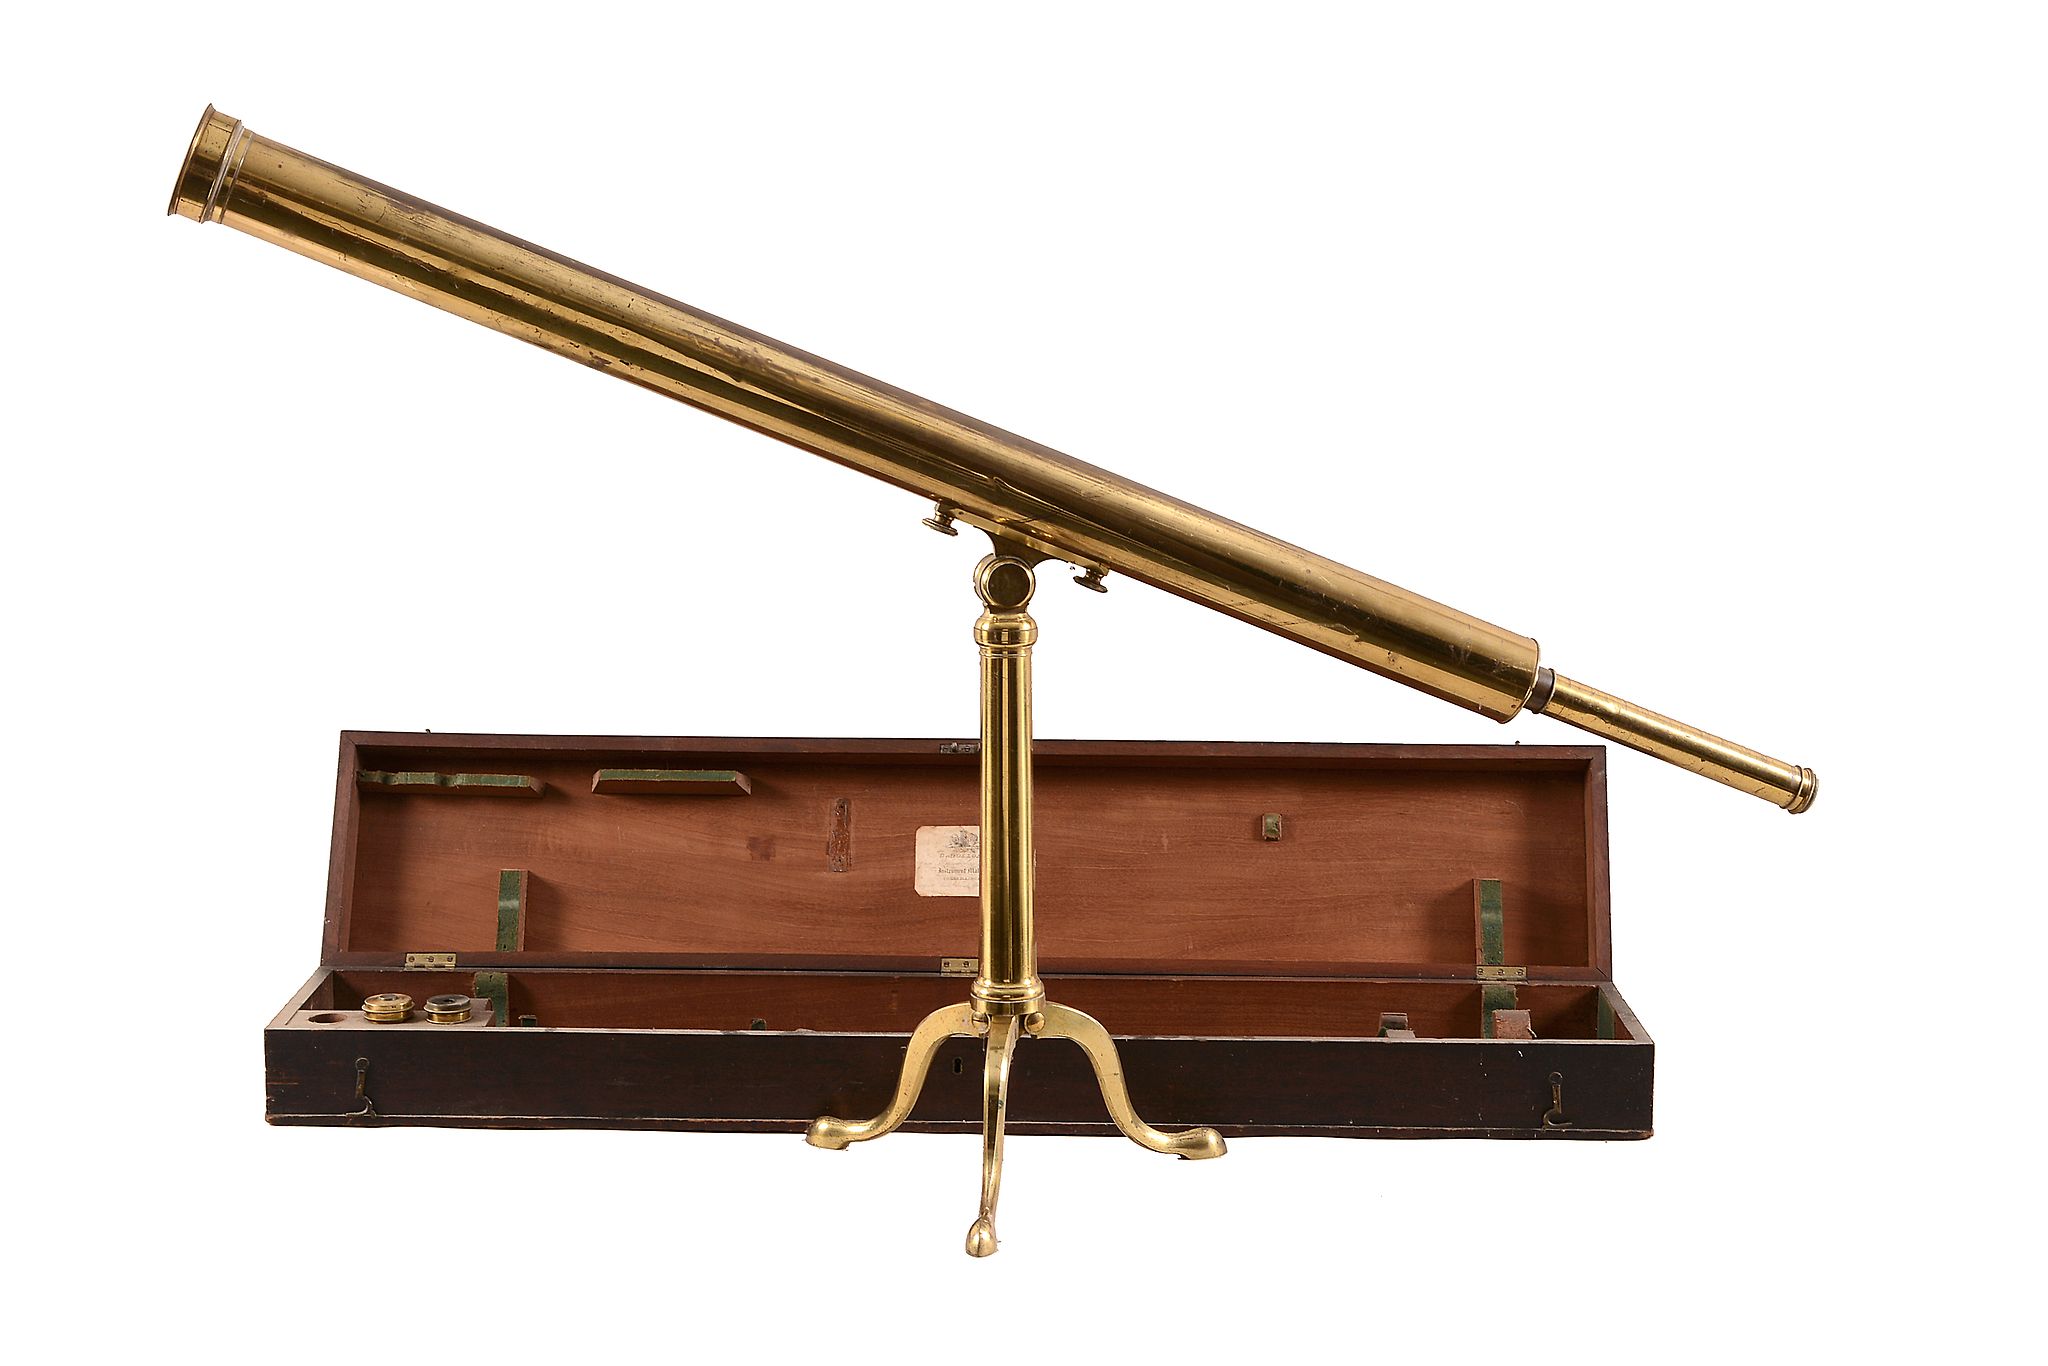 A Victorian lacquered brass 2.75-inch refracting telescope Dollond, London   A Victorian lacquered